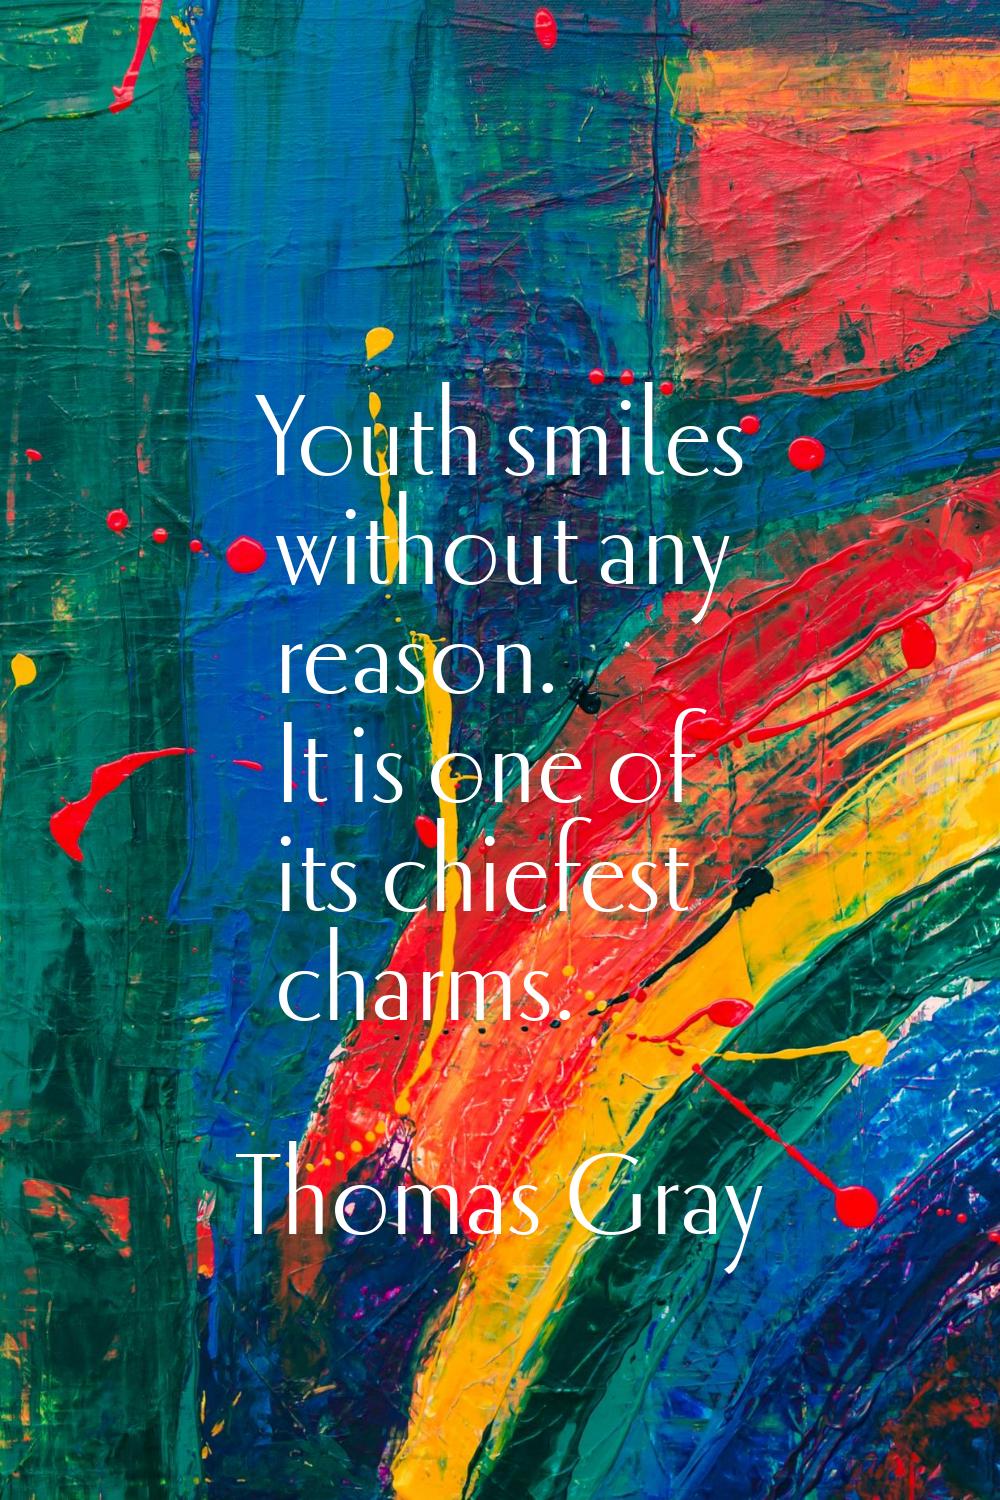 Youth smiles without any reason. It is one of its chiefest charms.